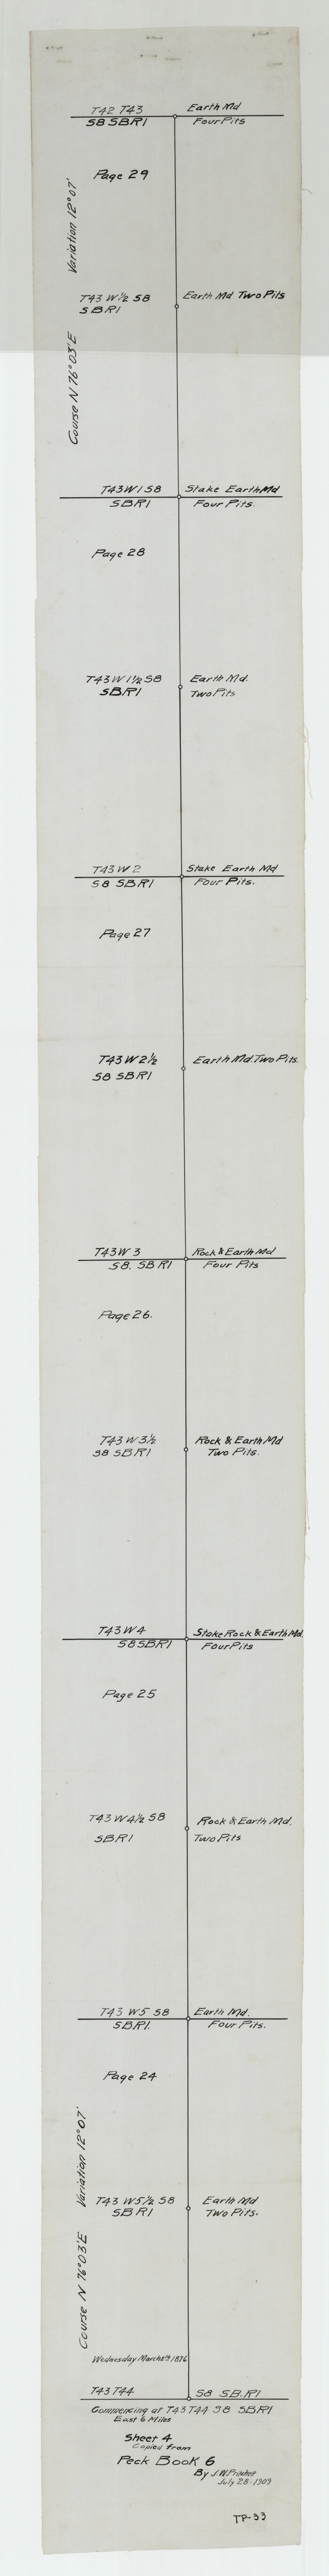 93170, Sheet 4 copied from Peck Book 6 [Strip Map showing T. & P. connecting lines], Twichell Survey Records